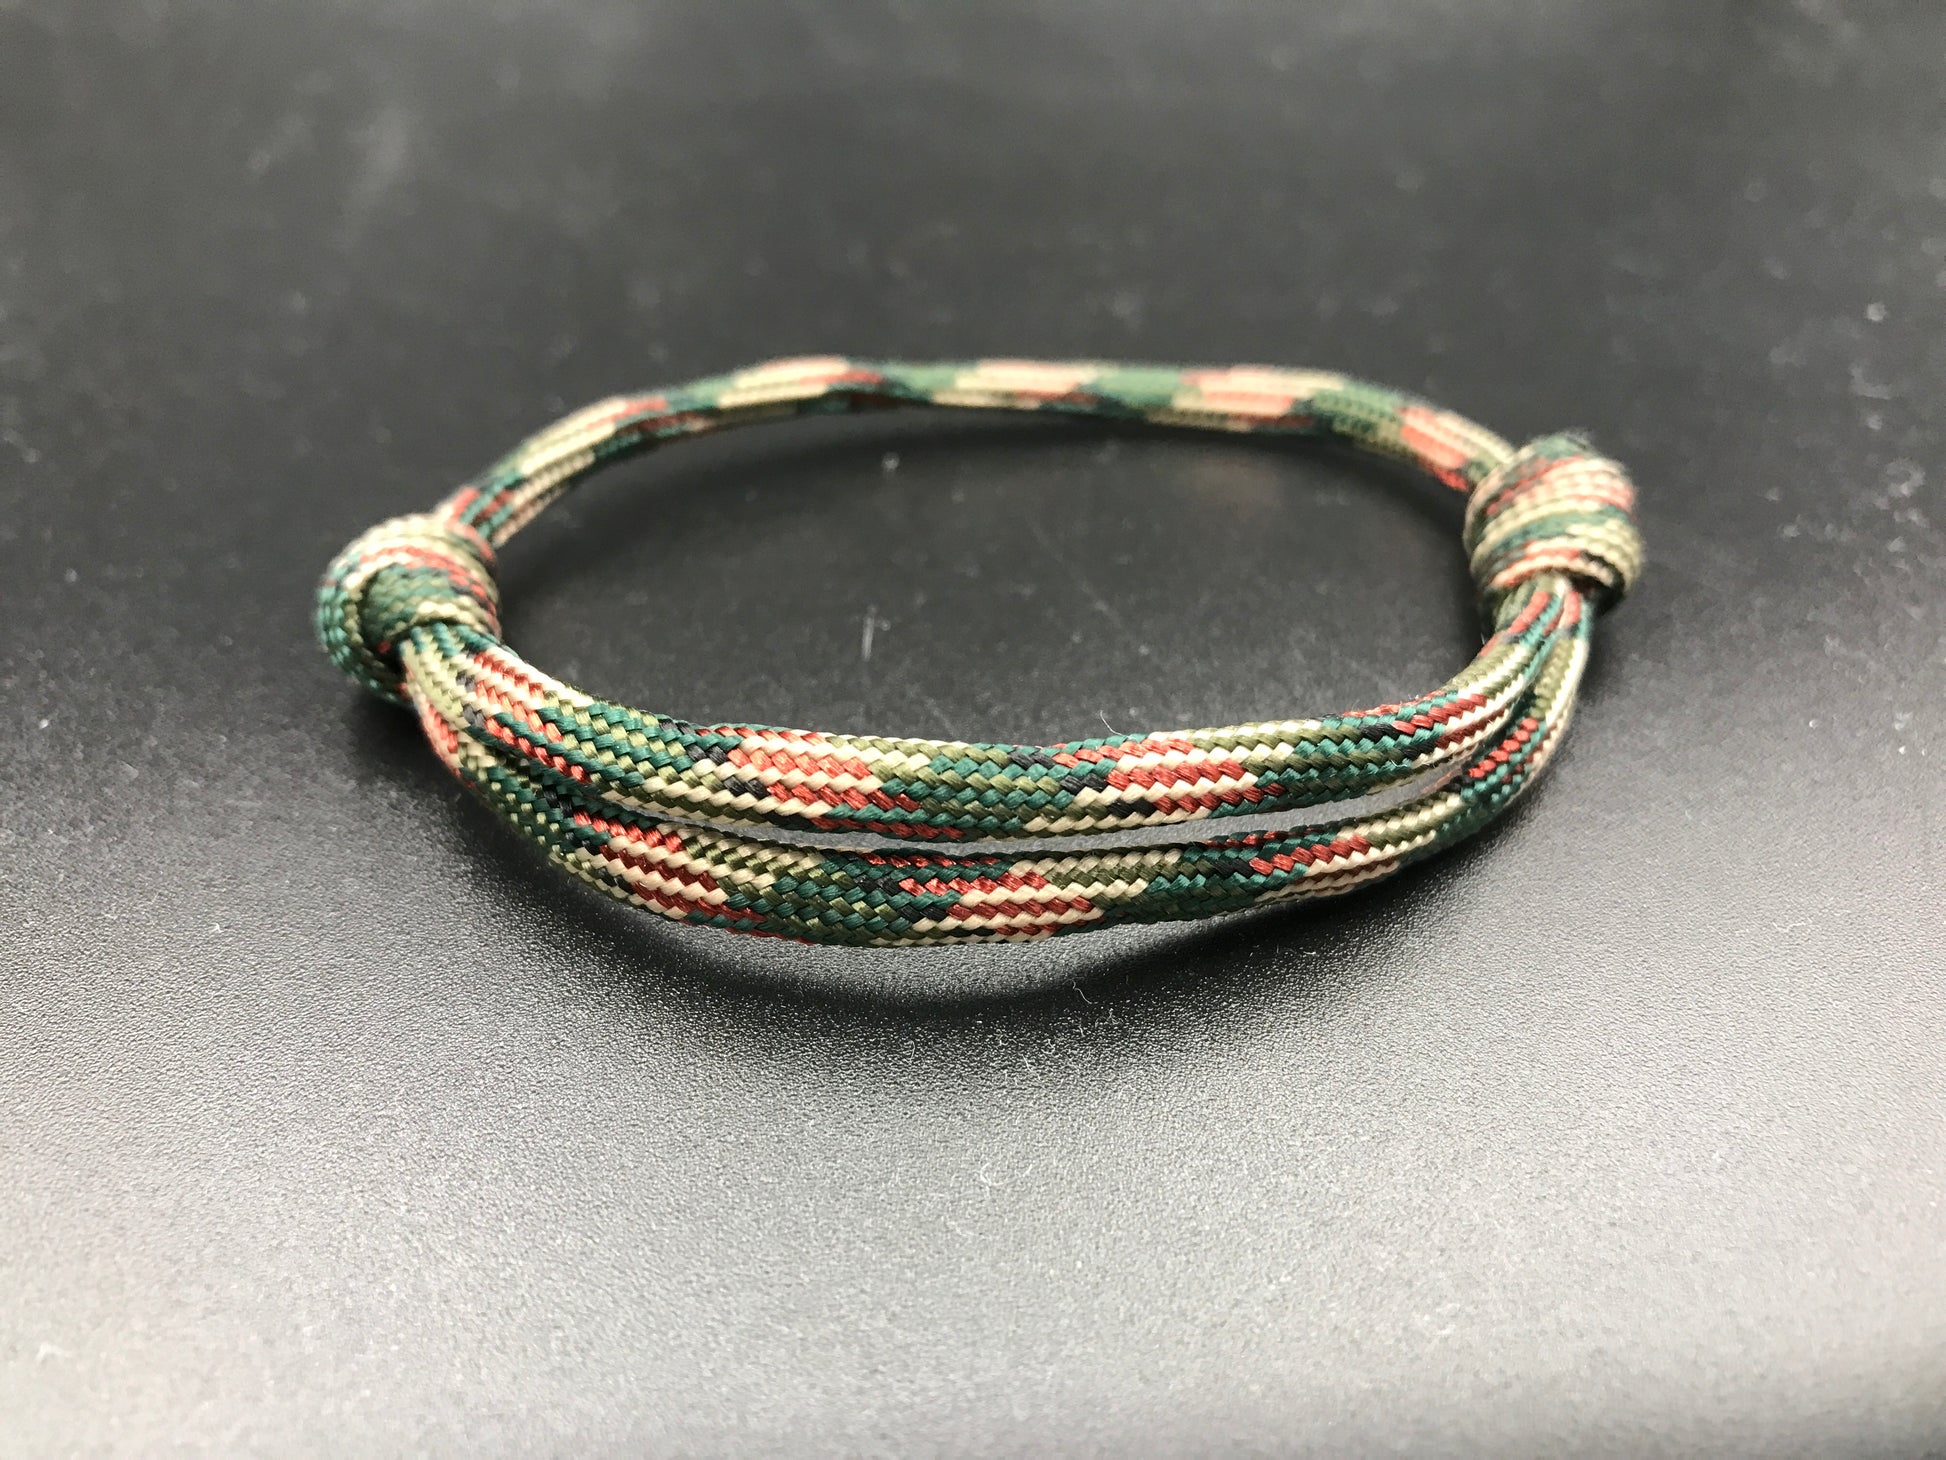 Paracord friendship bracelet in red green camo lightweight and adjustable 